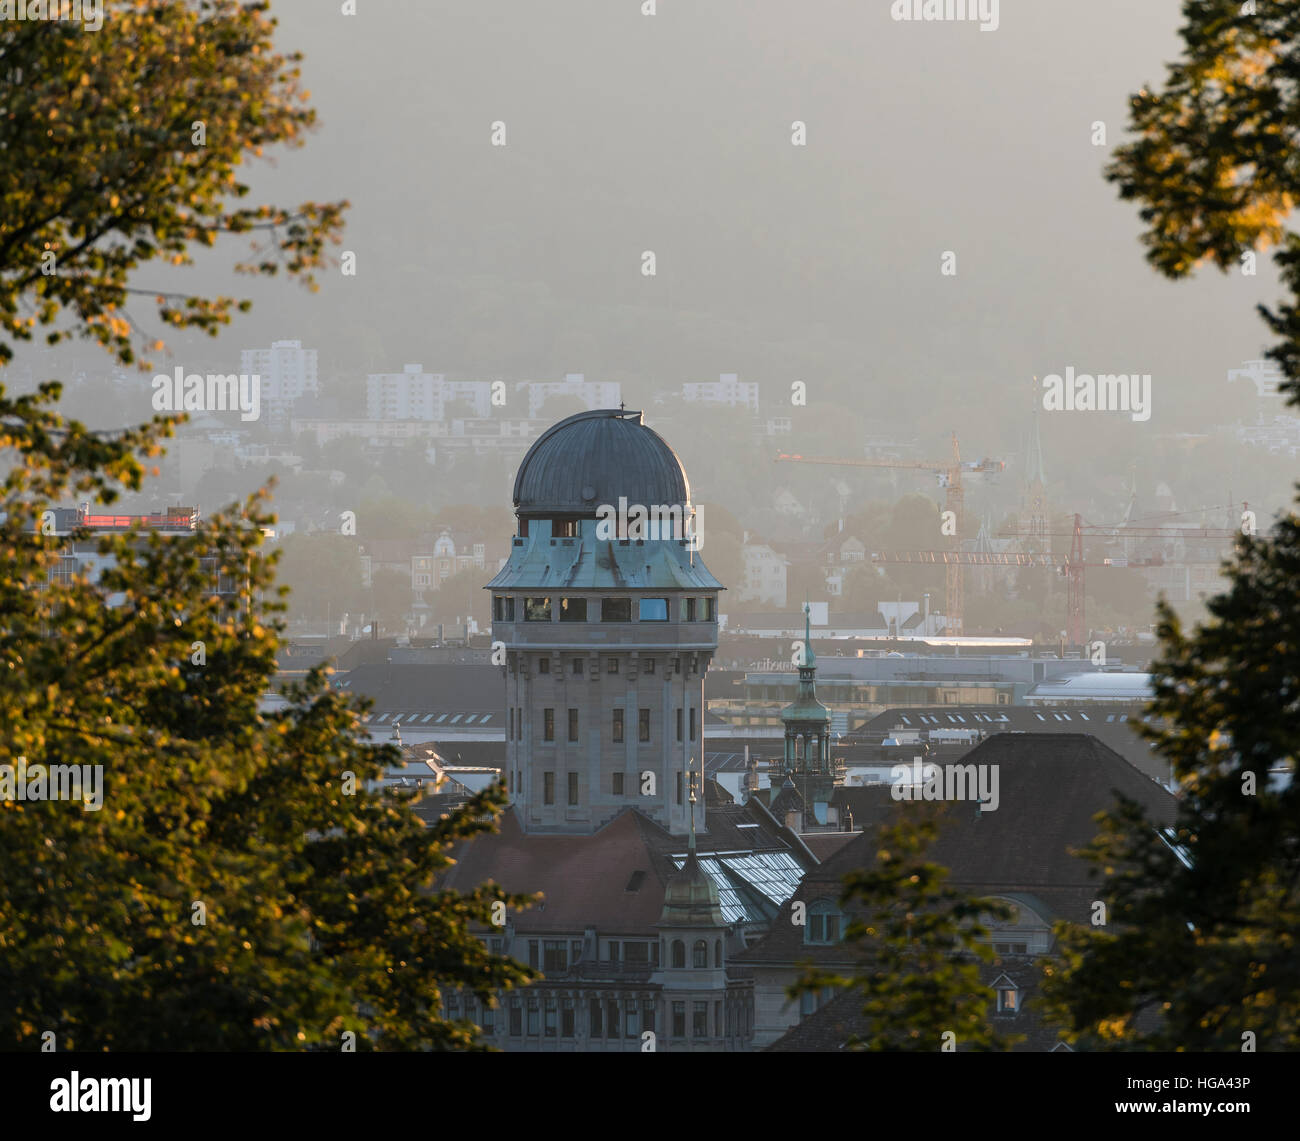 The sun is setting behind Zurich's historic Urania observatory in the city centre. Stock Photo